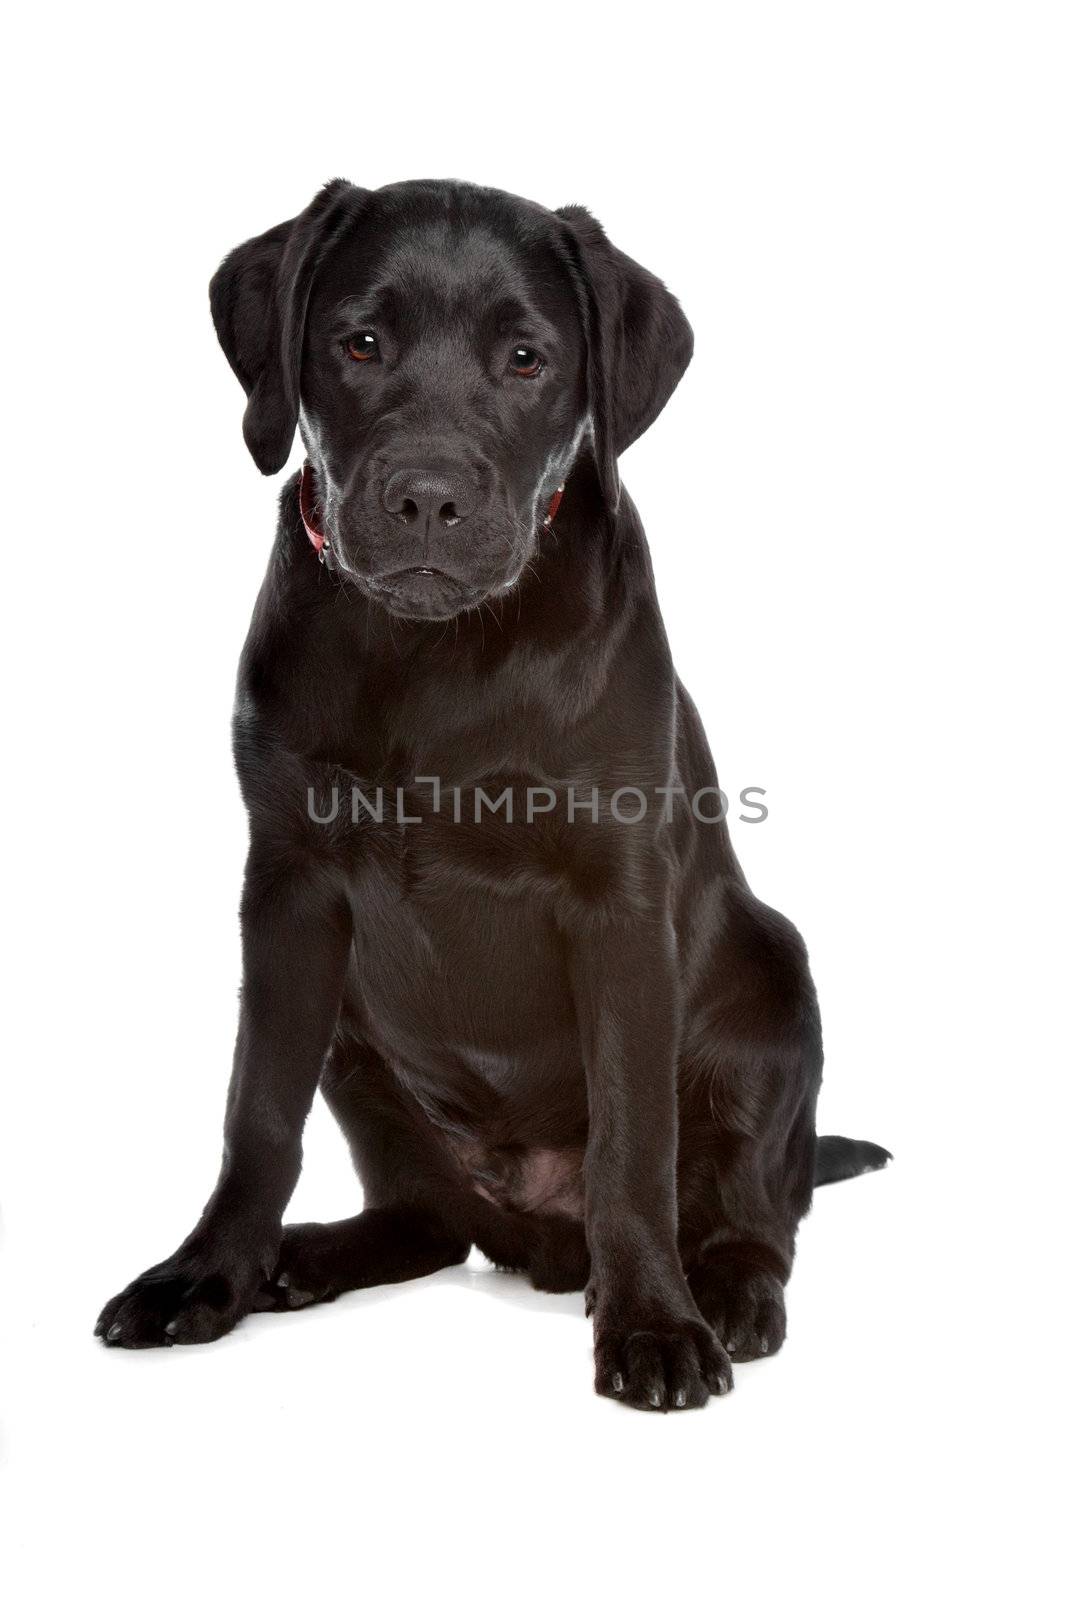 black Labrador isolated on a white background